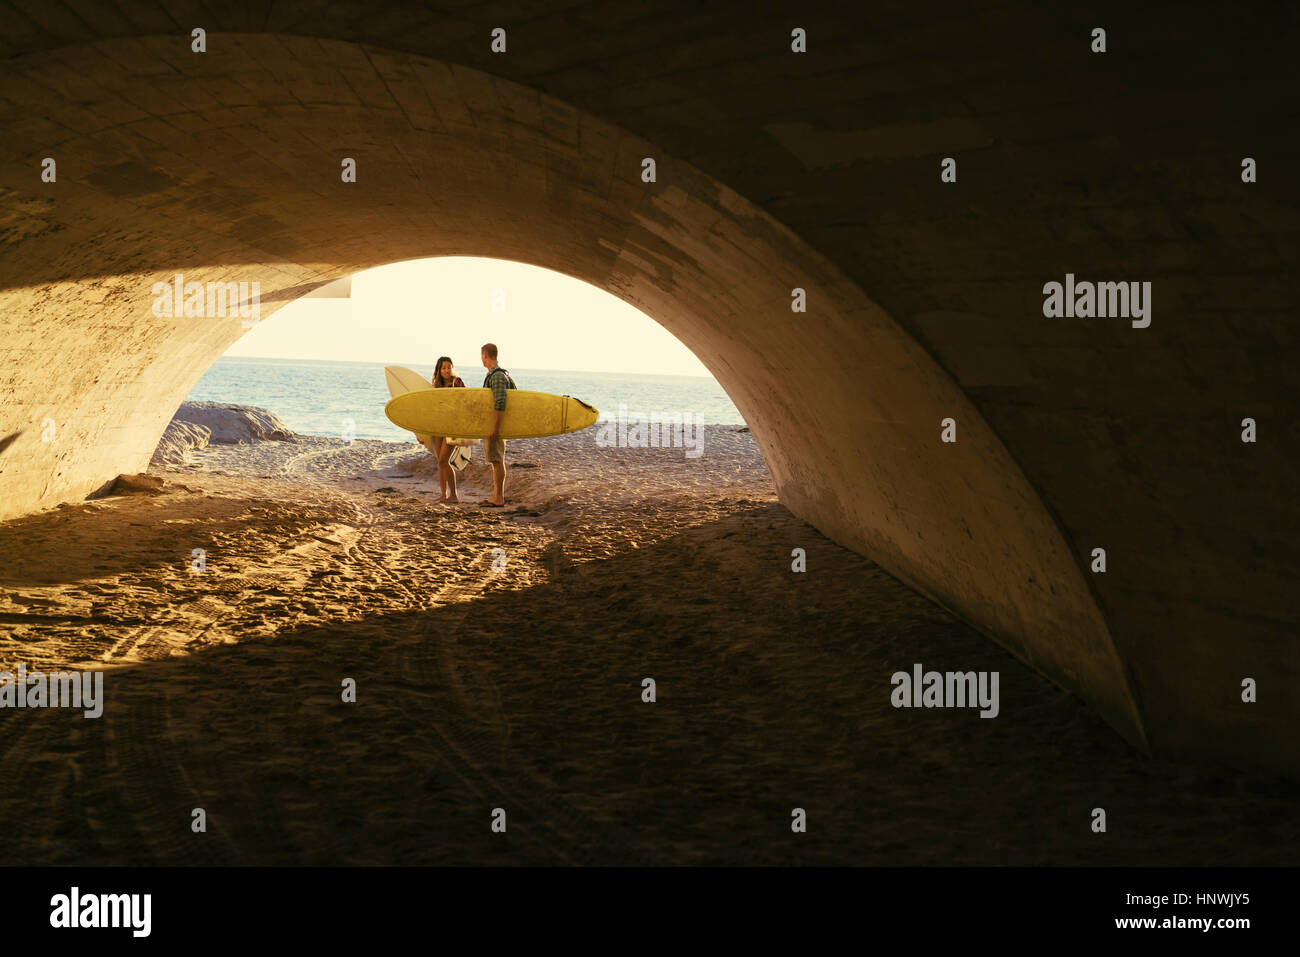 Surfing couple in underpass at Newport Beach, California, USA Stock Photo